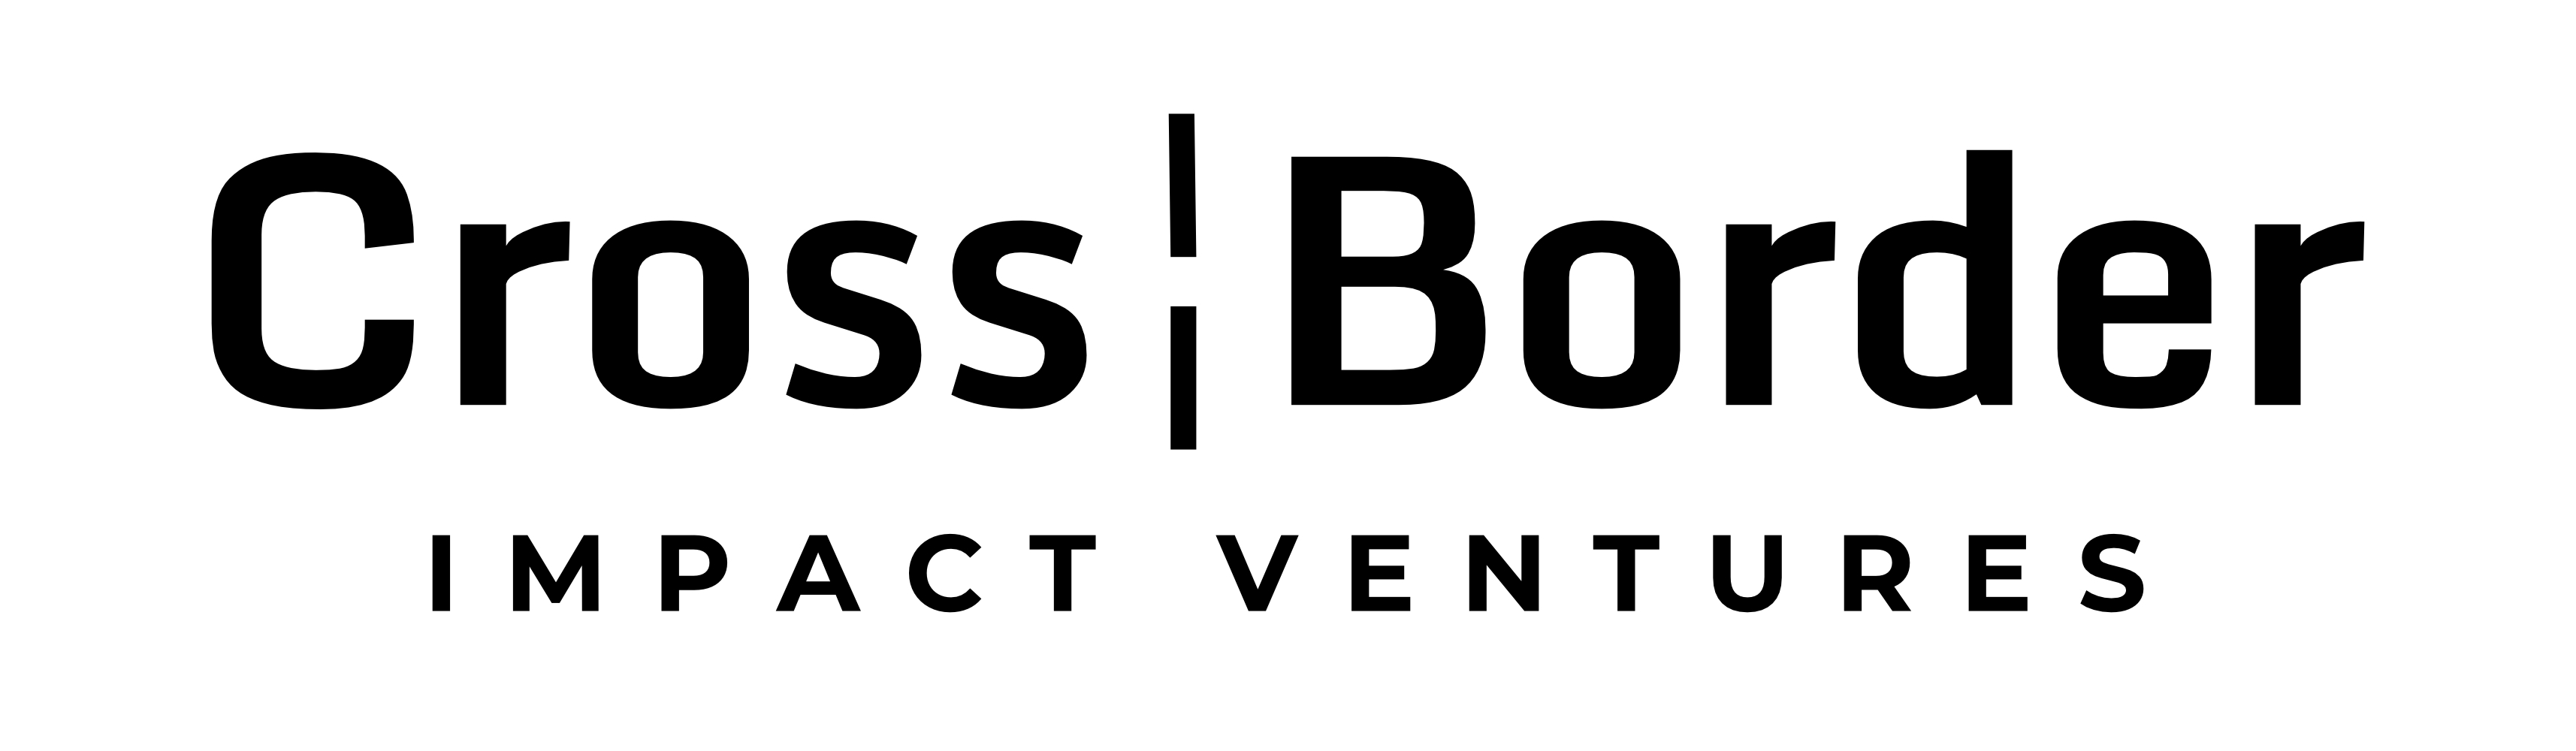 Cross-Border Impact Ventures Exceeds $90 Million in Final Close of Its  Women's and Children's Health Technology Fund